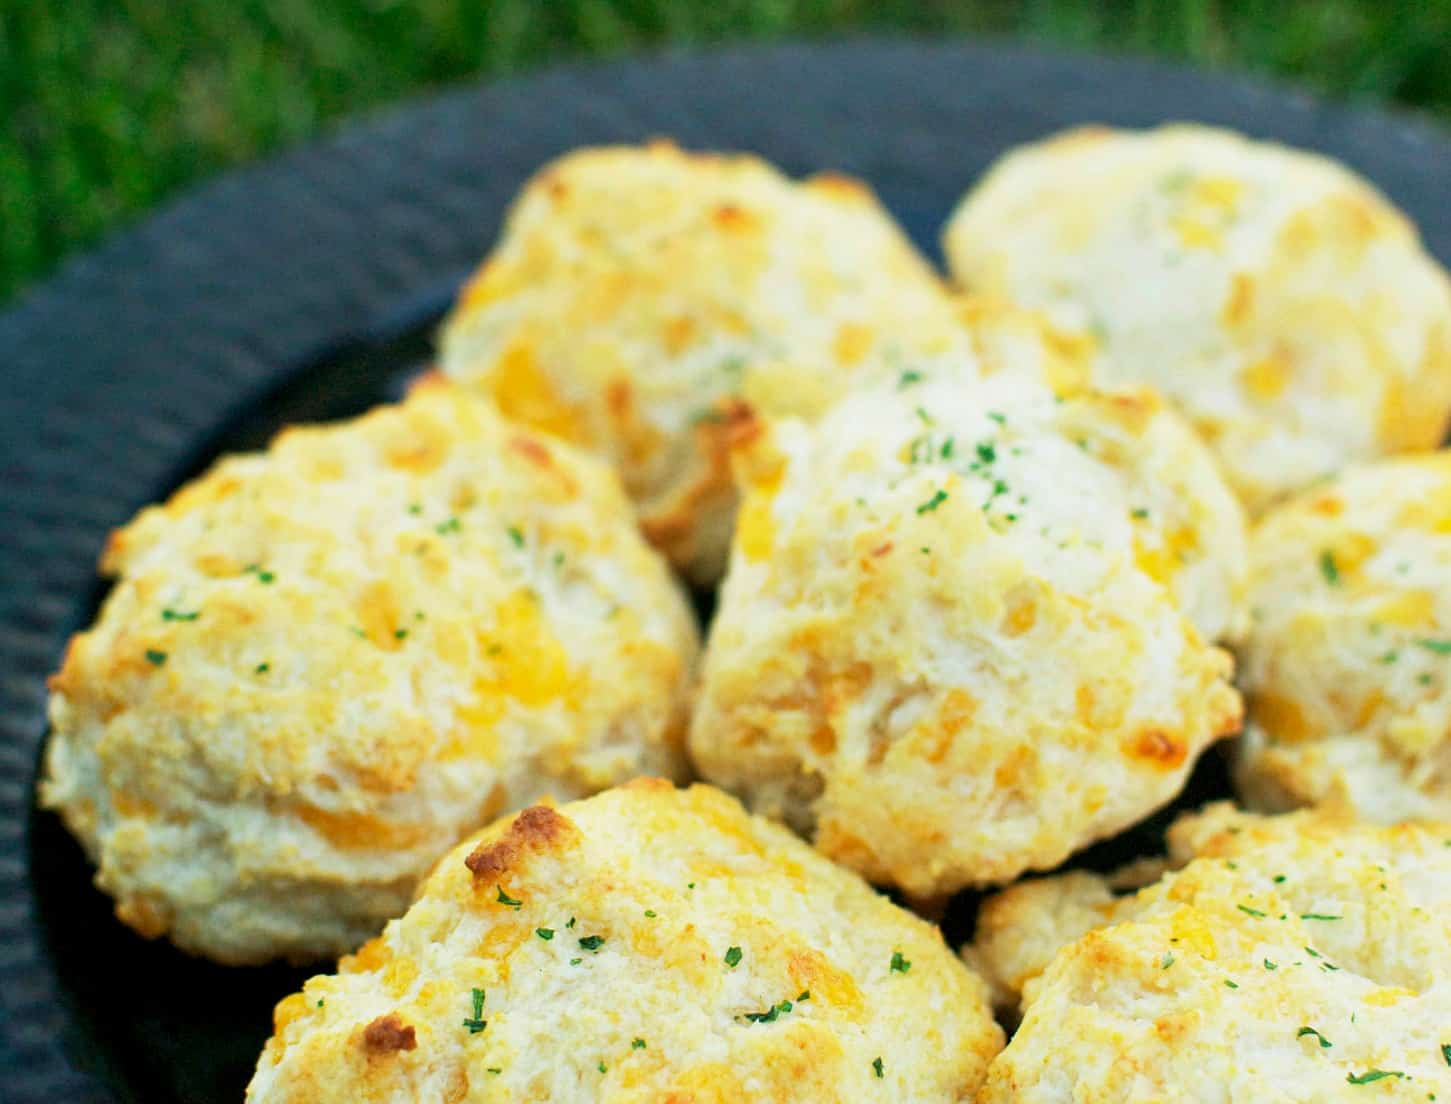 Have you ever tried to make Red lobster cheddar bay biscuits at home? , cheddar bay biscuit